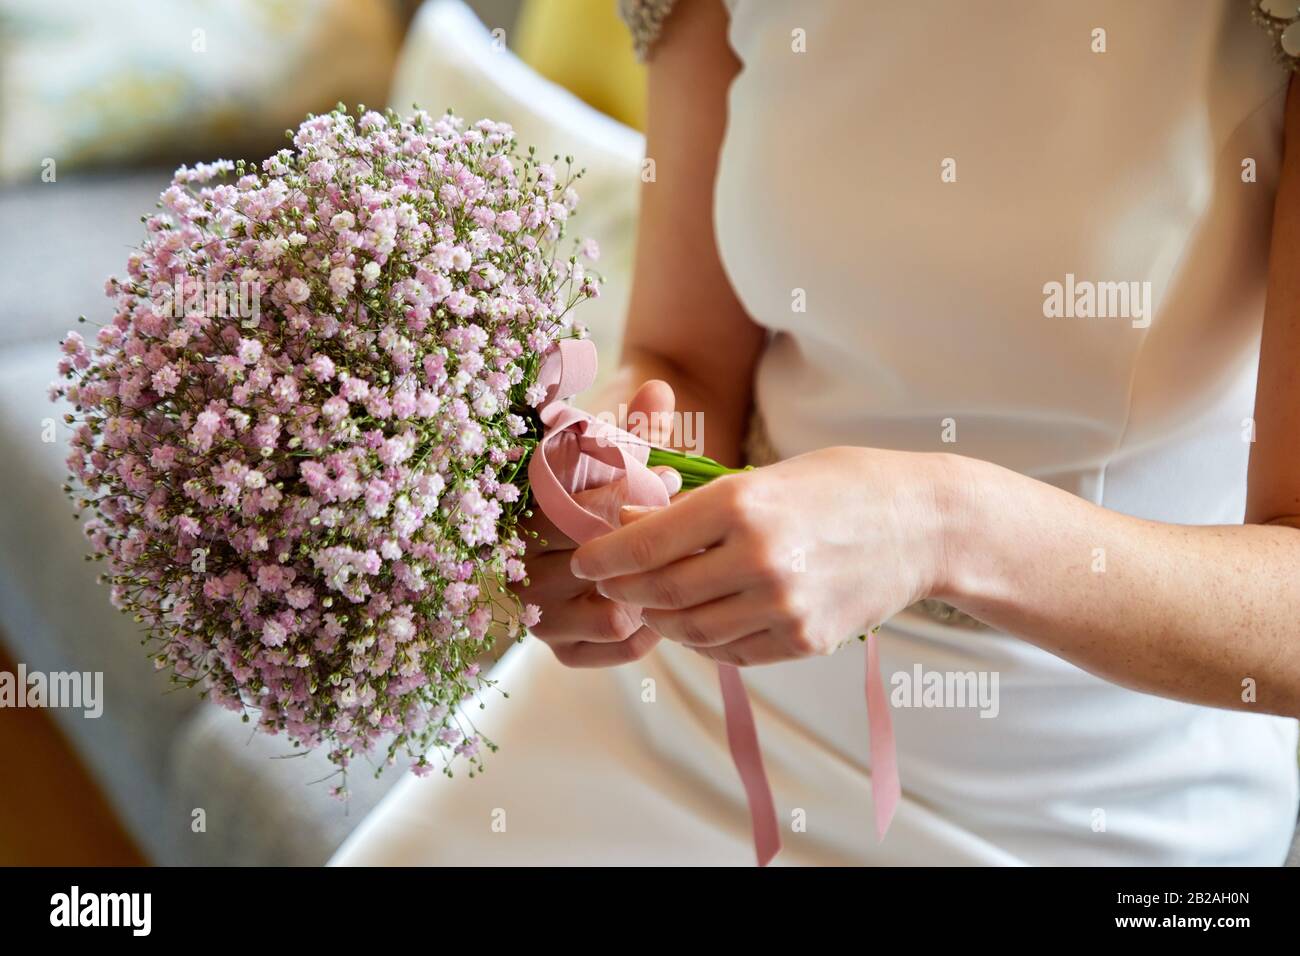 Bride with bouquet of flowers, white wedding dress Stock Photo